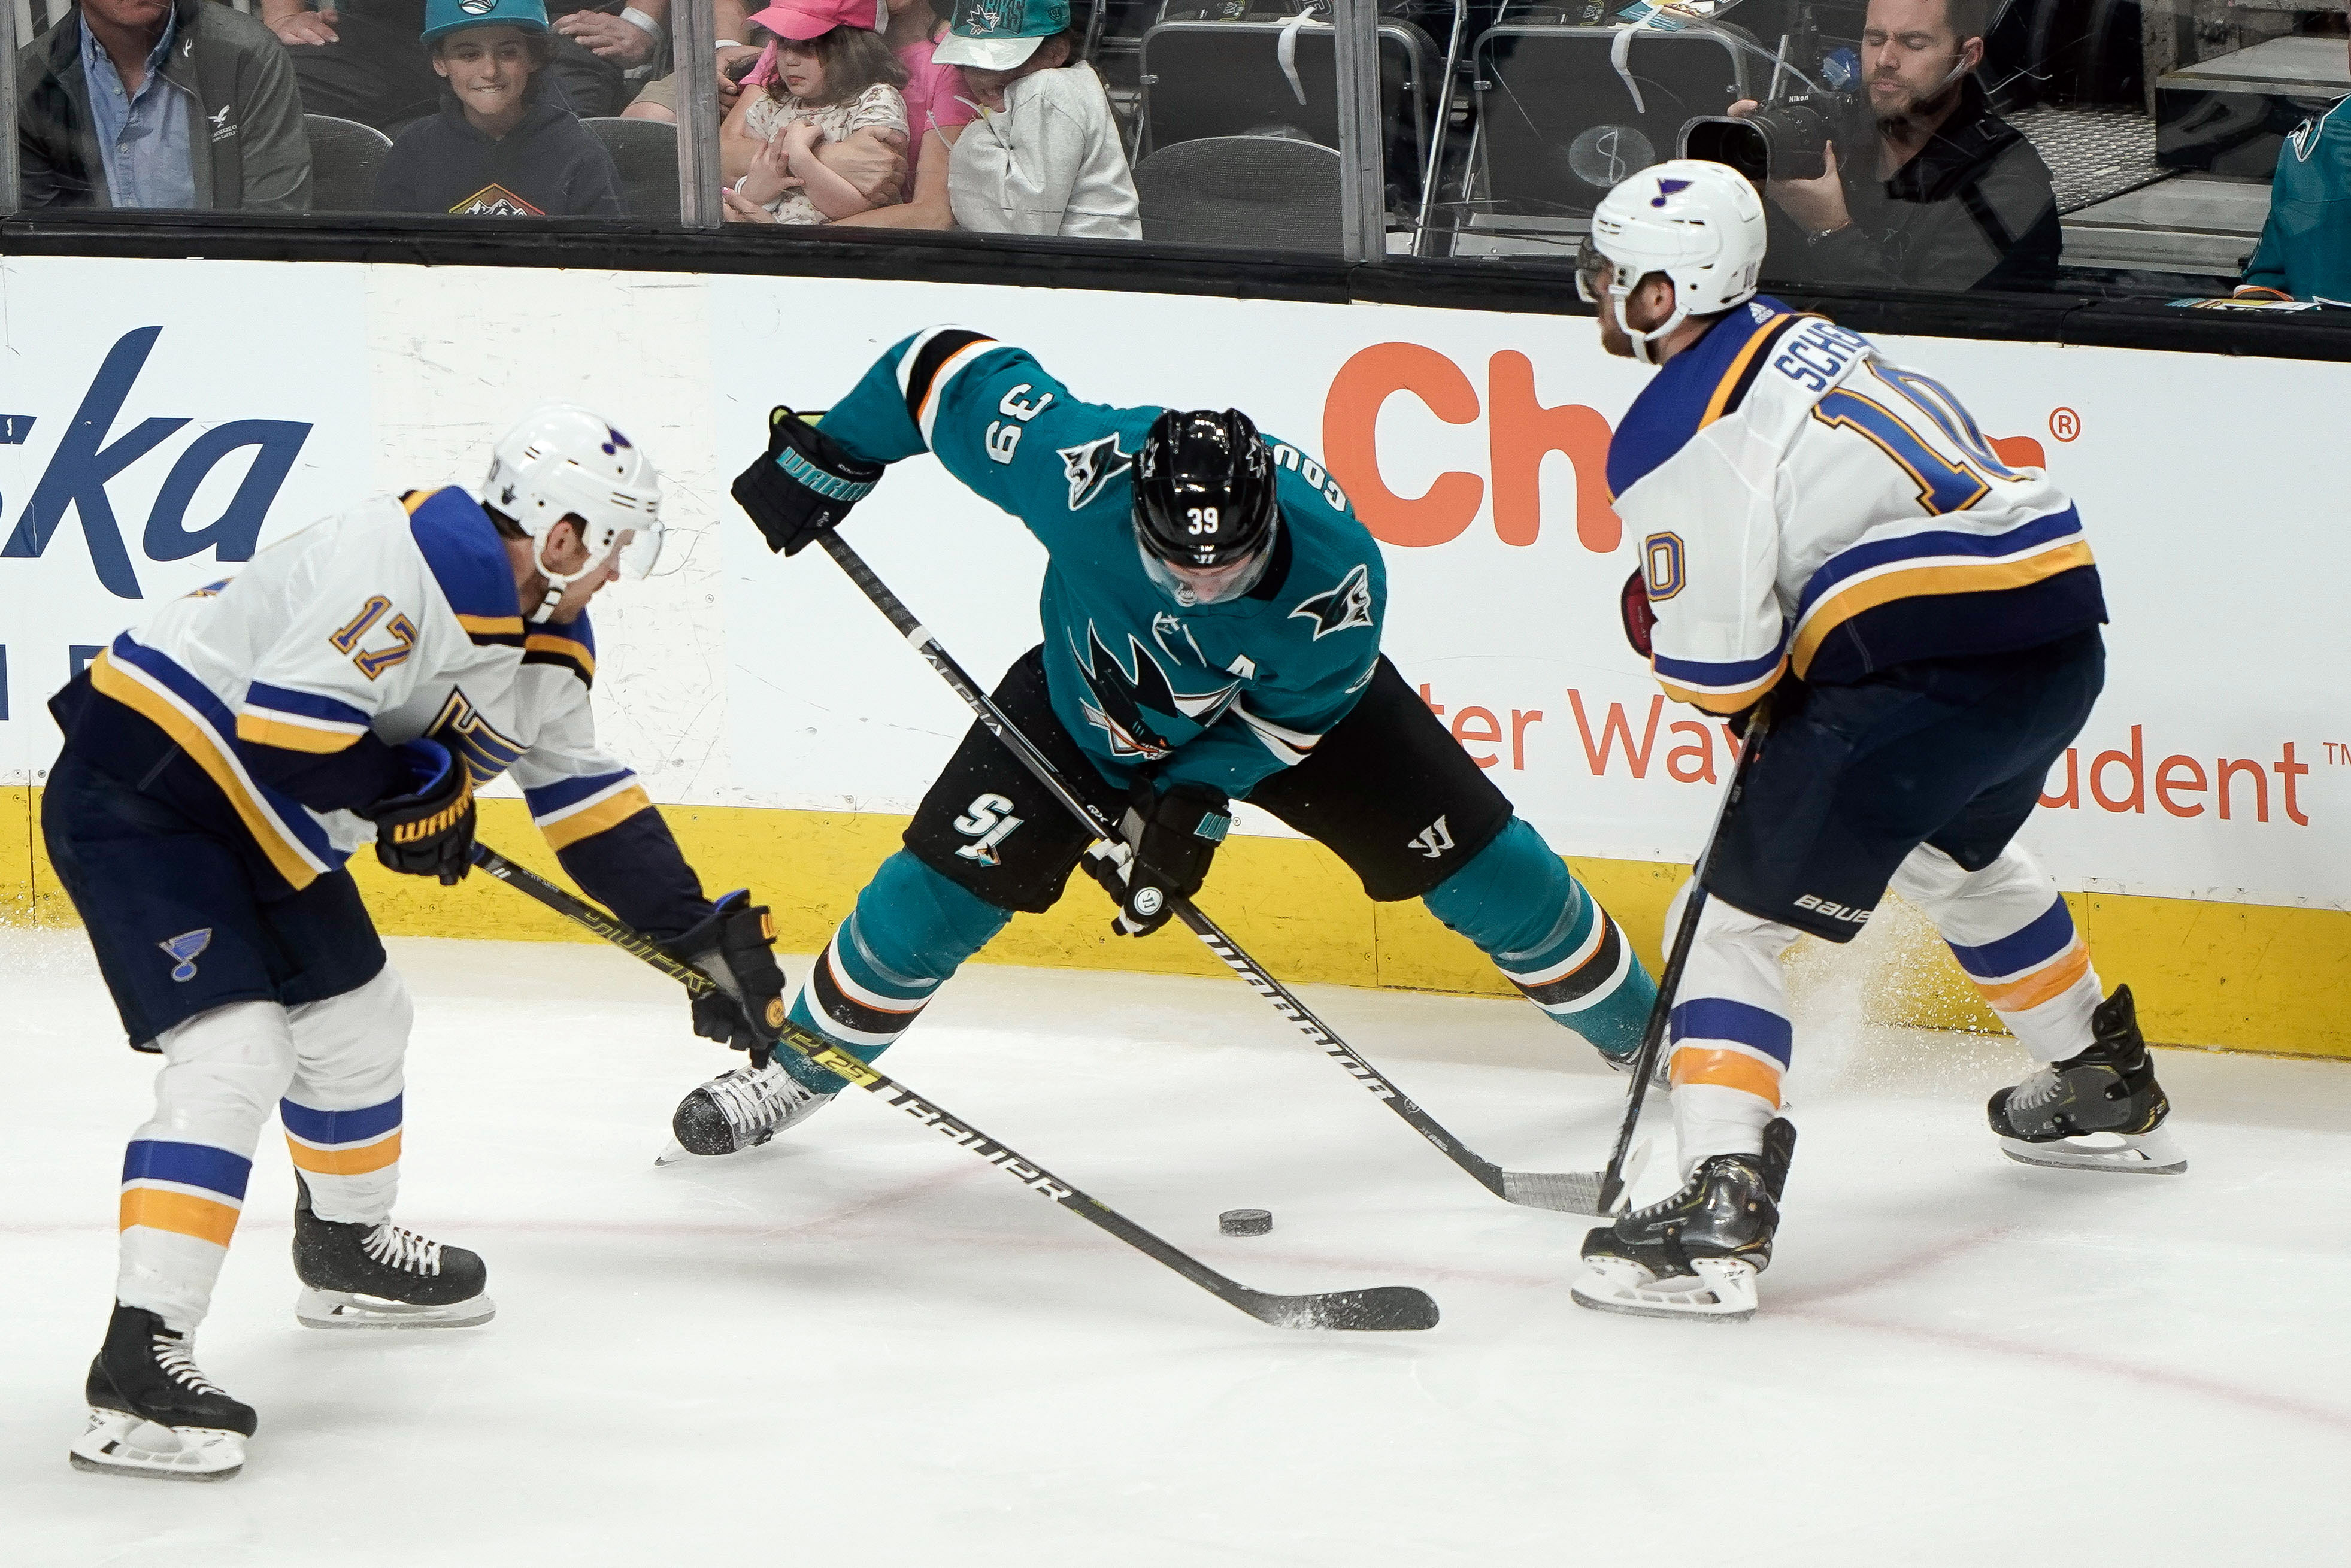 2019-05-12T012320Z_1944102273_NOCID_RTRMADP_3_NHL-STANLEY-CUP-PLAYOFFS-ST-LOUIS-BLUES-AT-SAN-JOSE-SHARKS